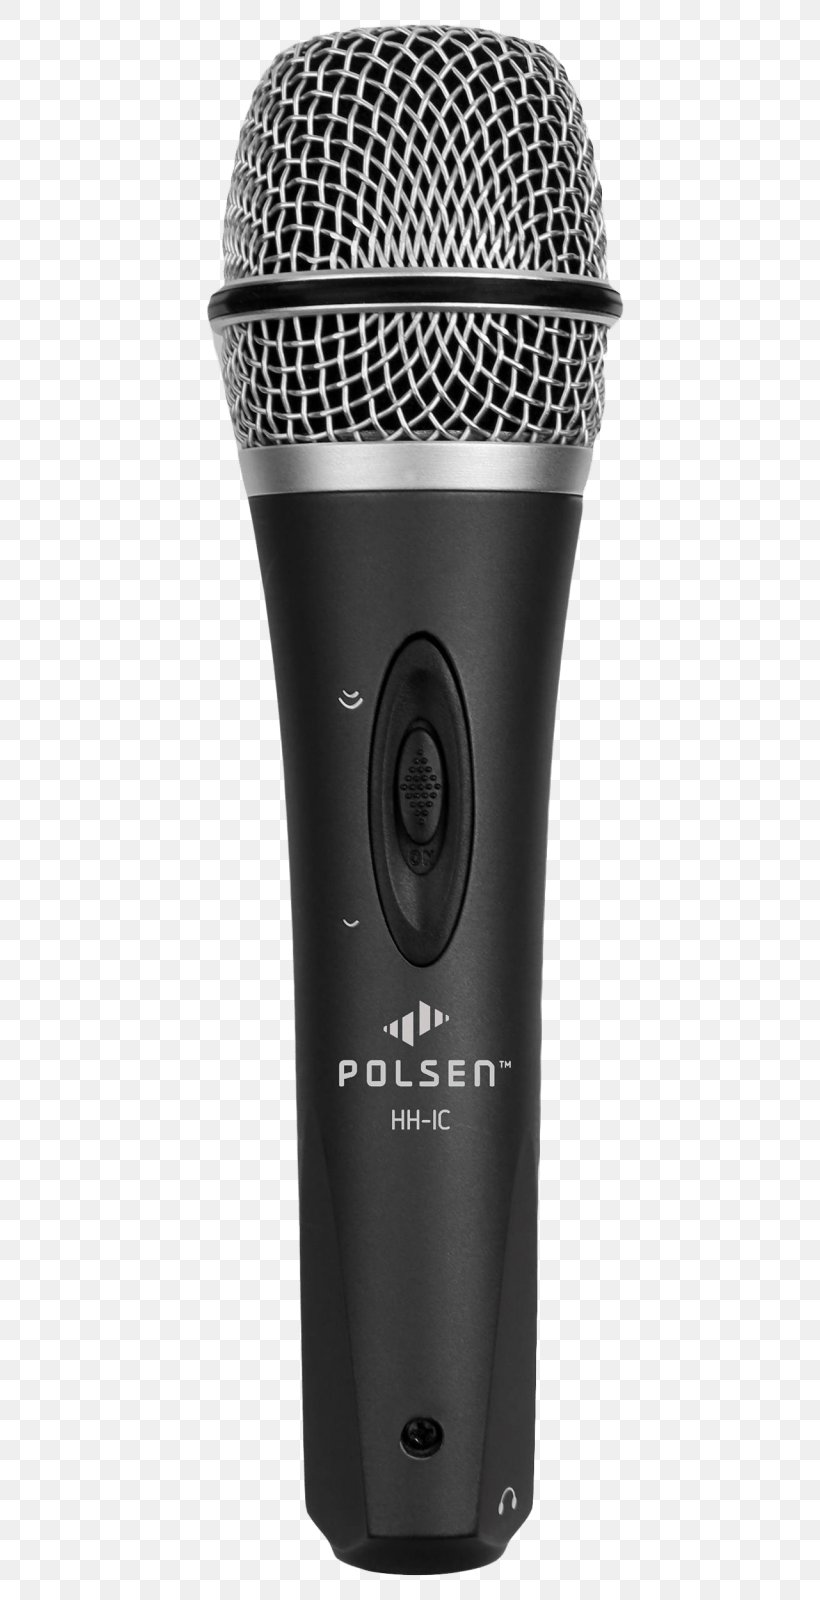 Microphone Clip Art Image Transparency, PNG, 480x1600px, Microphone, Audio, Audio Equipment, Electronic Device, Lavalier Microphone Download Free